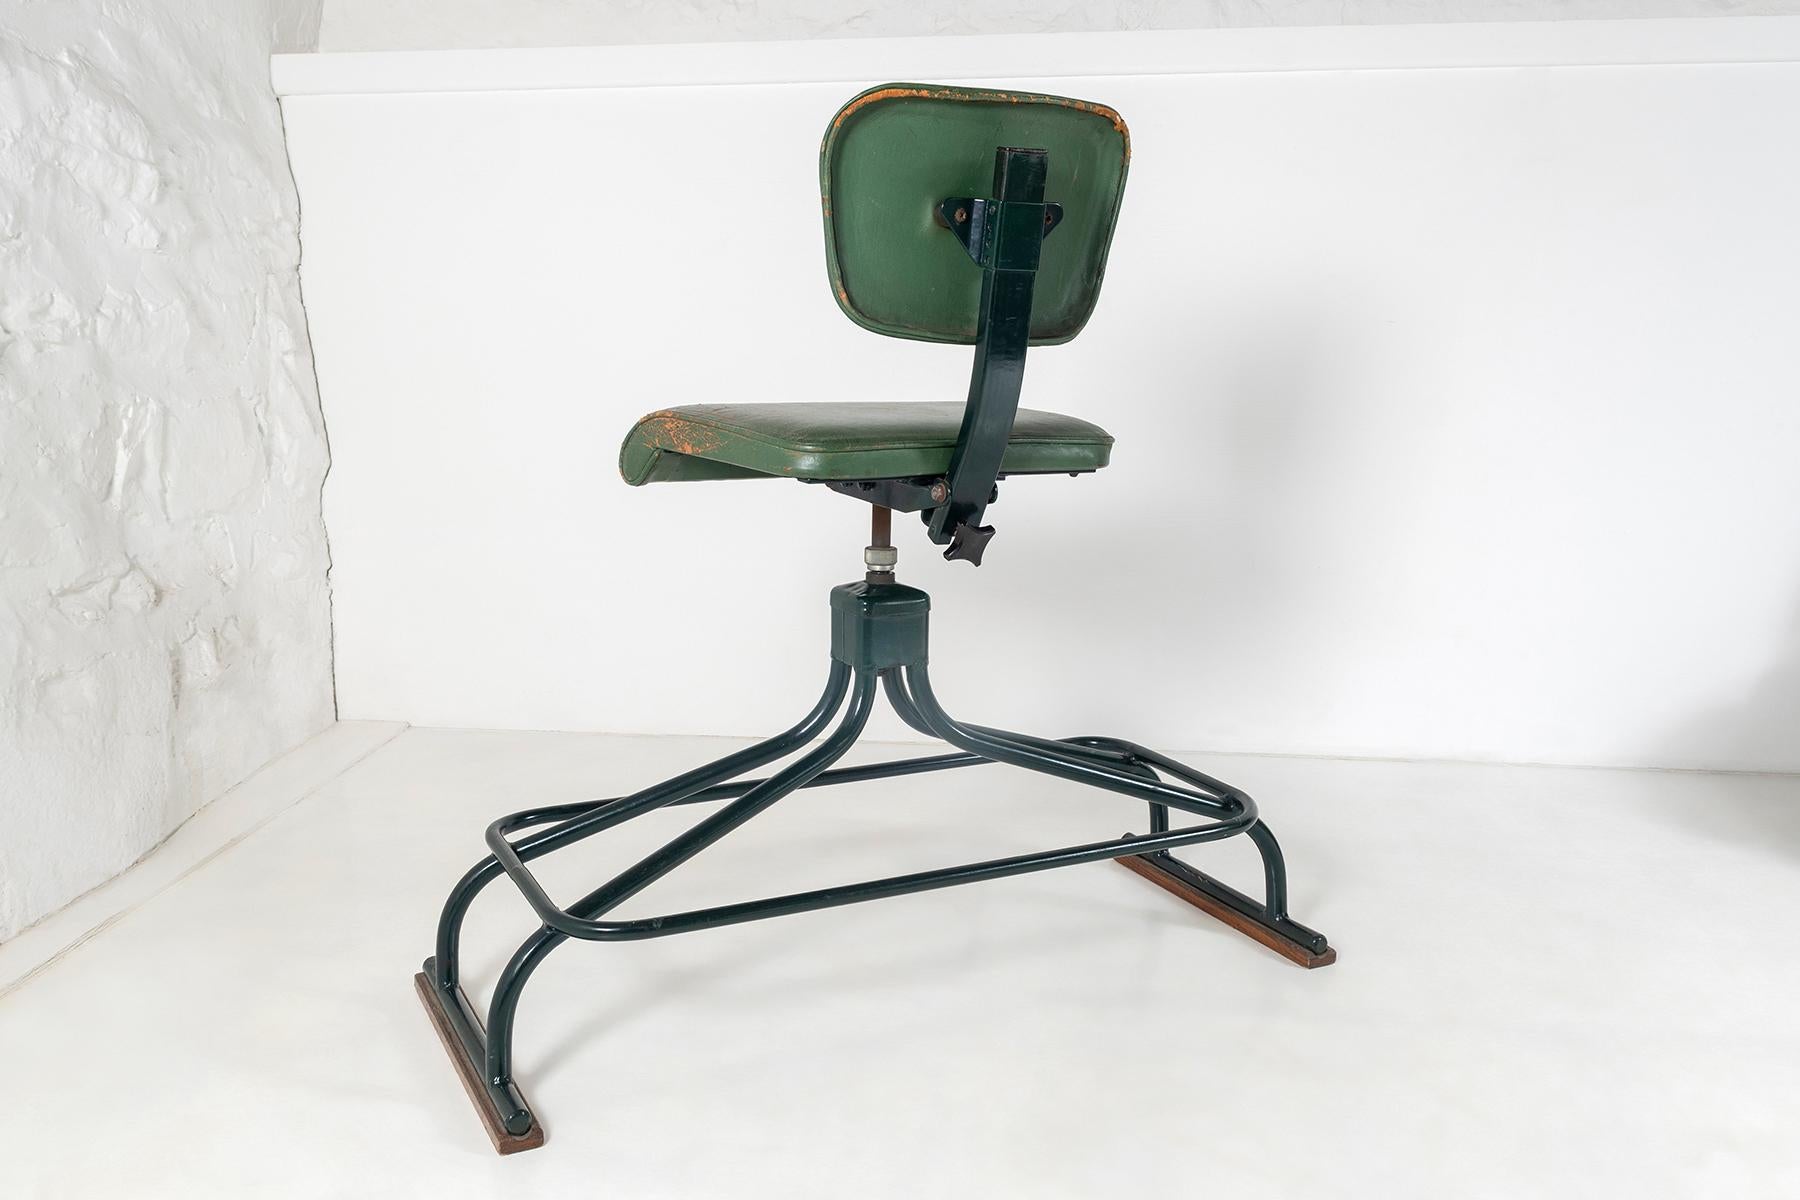 Rare 1950 Industrial Factory Swivel Stool by Evertaut Musician Guitarist Stool In Good Condition For Sale In Llanbrynmair, GB